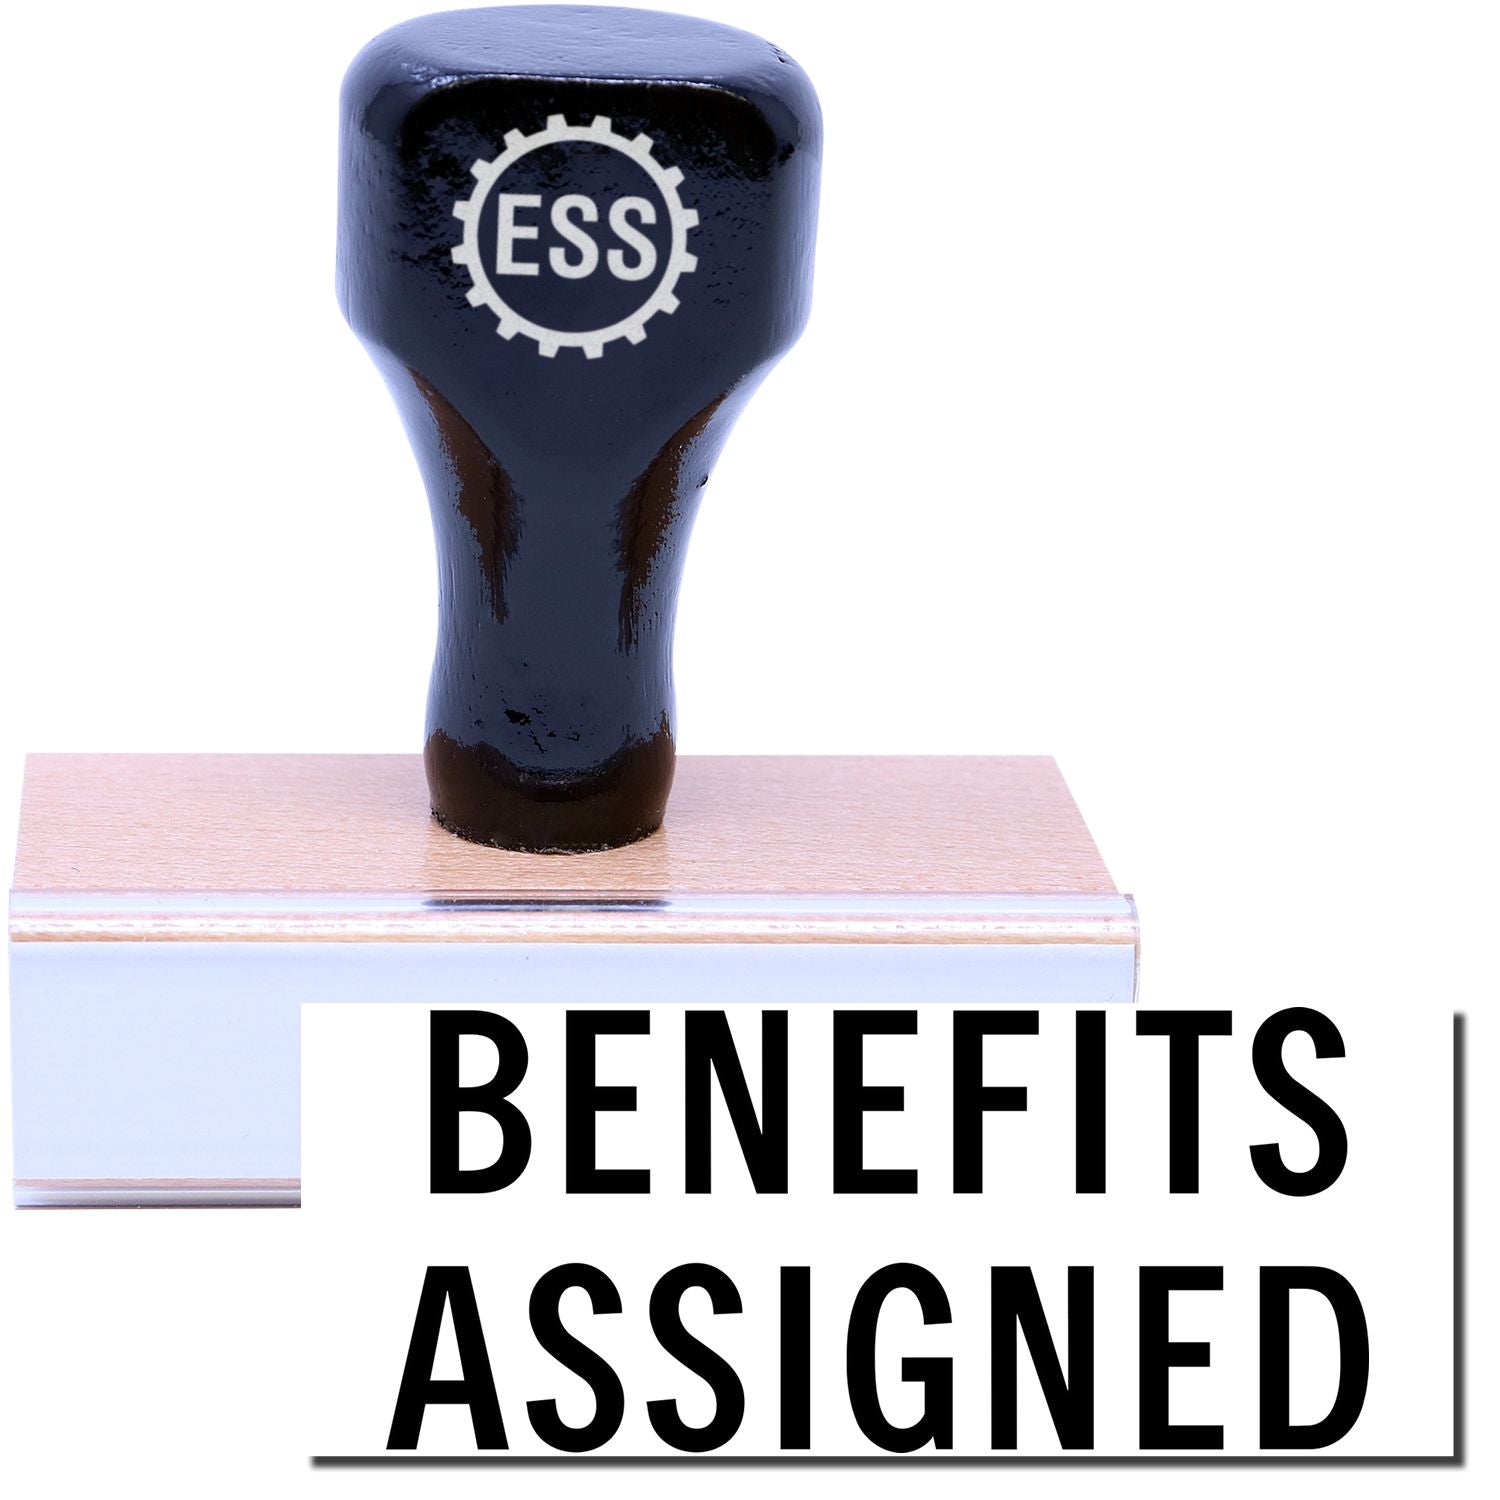 A stock office rubber stamp with a stamped image showing how the text "BENEFITS ASSIGNED" is displayed after stamping.